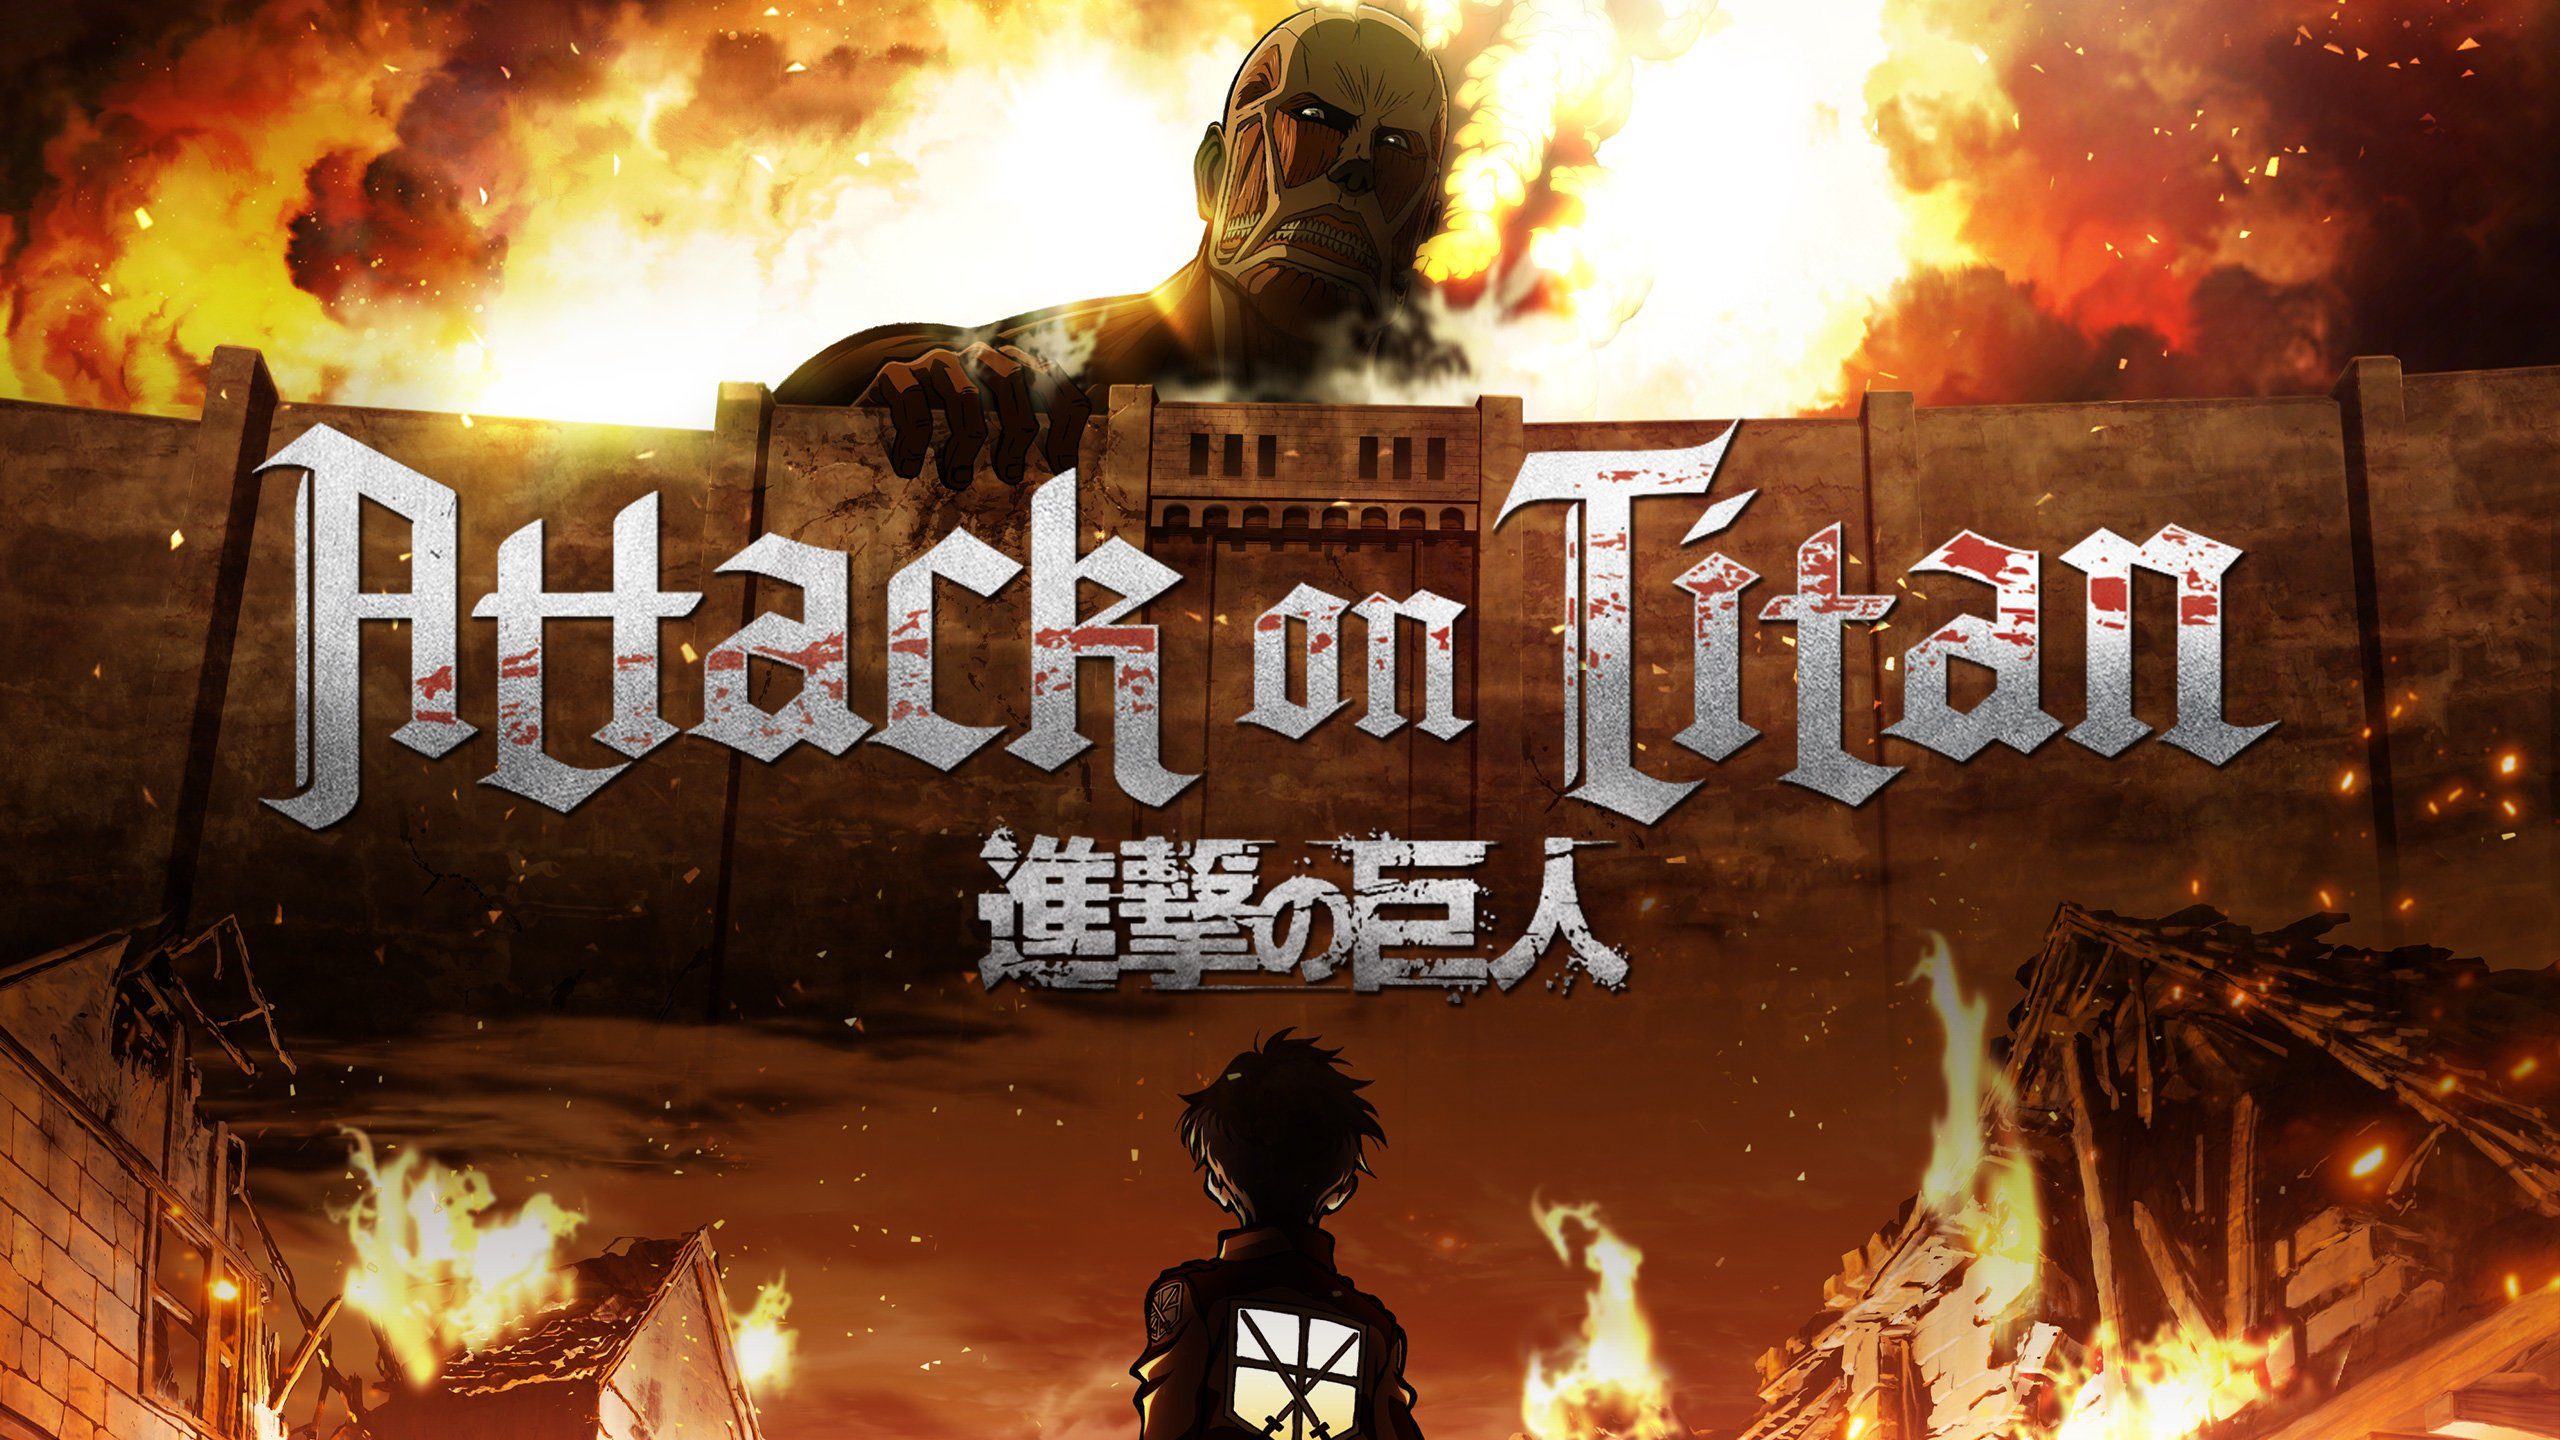 Attack on Titan animation studio to be changed